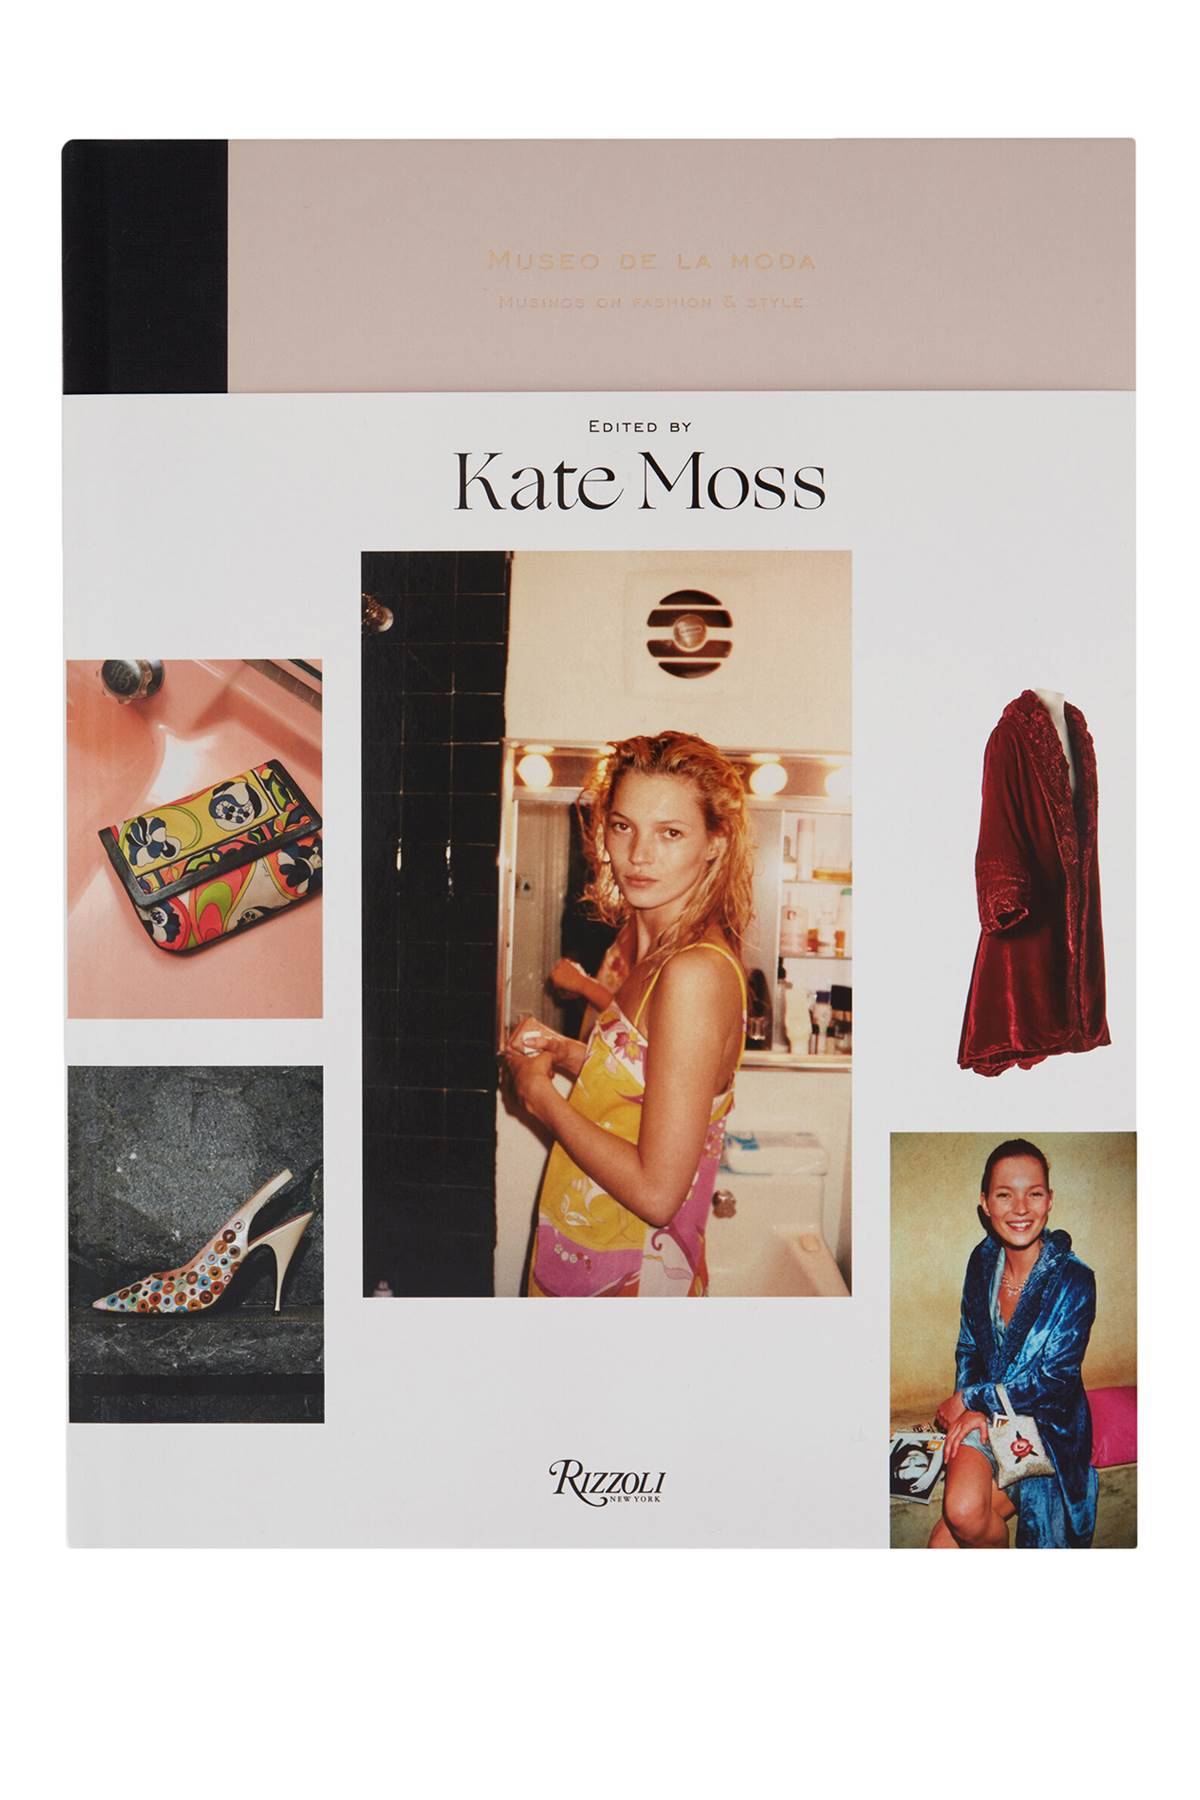 NEW MAGS NEW MAGS museo de la mode - kate moss